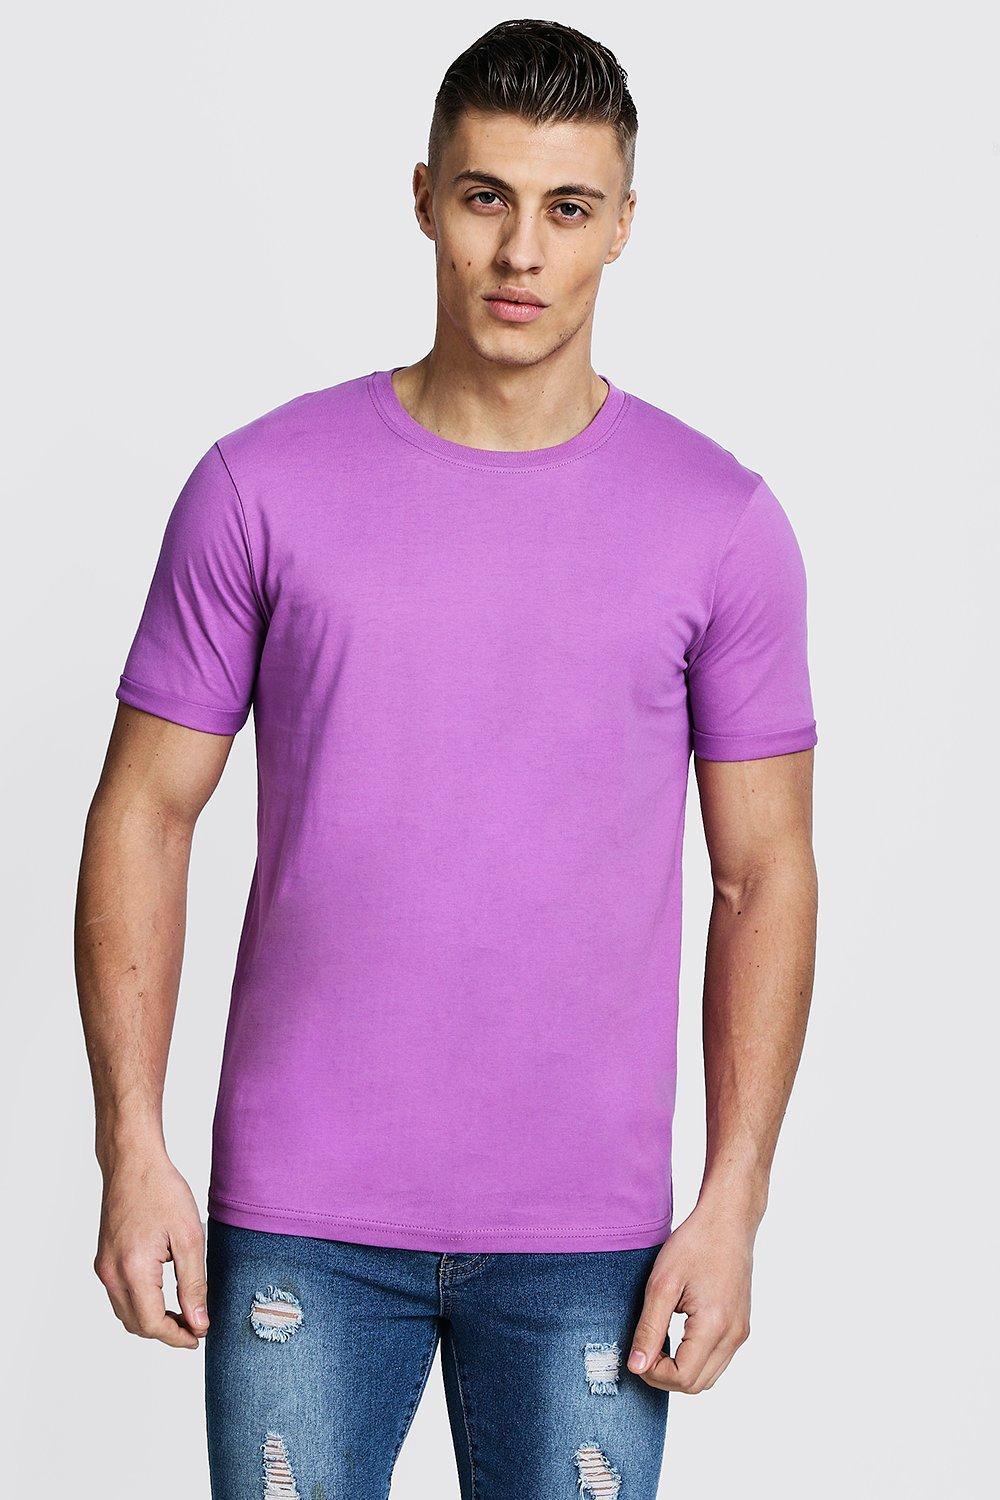 BoohooMAN Crew Neck T-shirt With Rolled Sleeves in Purple for Men - Lyst